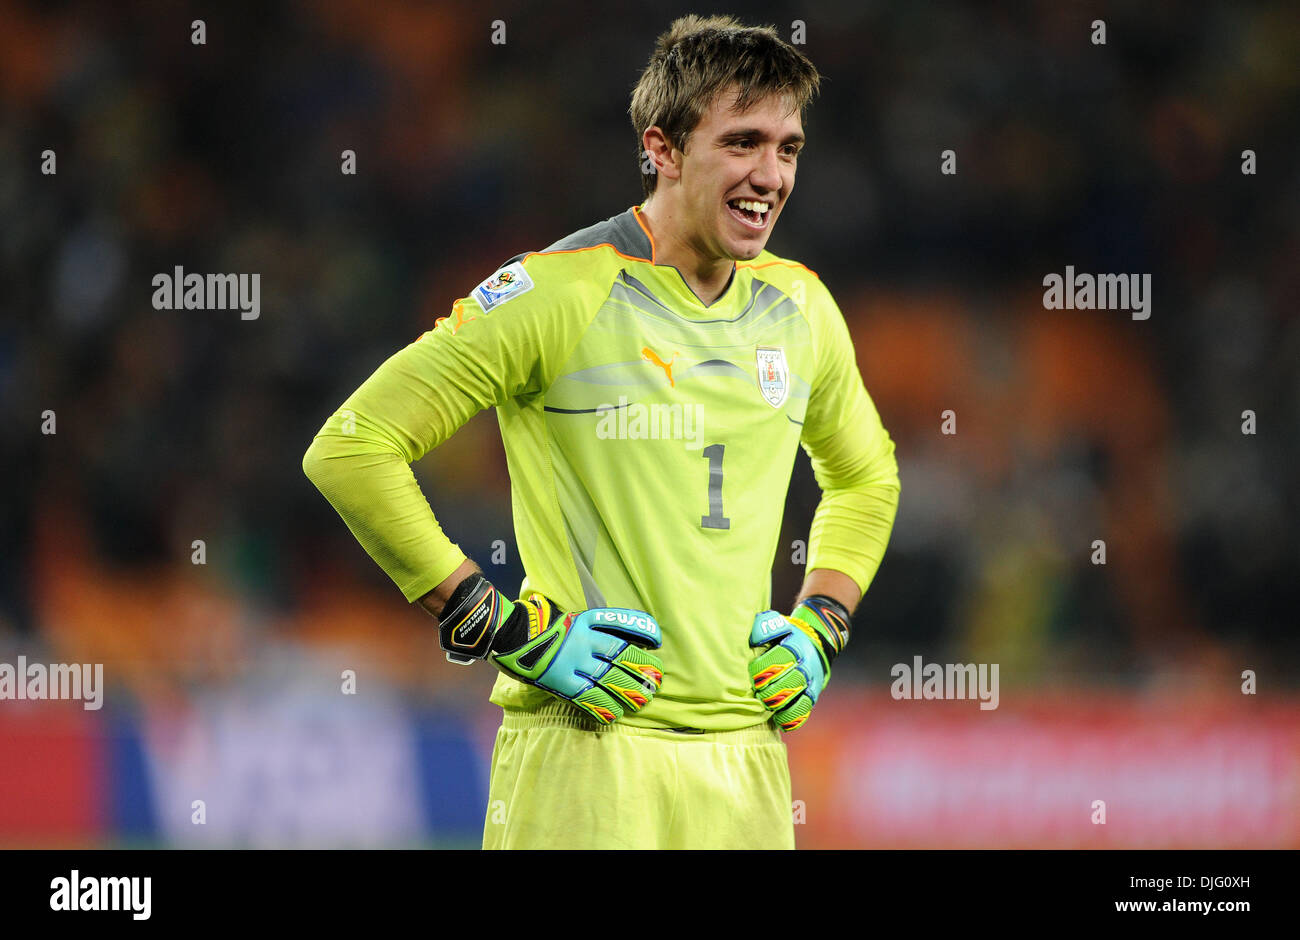 July 02, 2010 - Johannesburg, South Africa - Fernando Muslera of Uruguay smiles after the 2010 FIFA World Cup Quarter Final soccer match between Uruguay and Ghana at Soccer City Stadium on June 02, 2010 in Johannesburg, South Africa. (Credit Image: © Luca Ghidoni/ZUMApress.com) Stock Photo